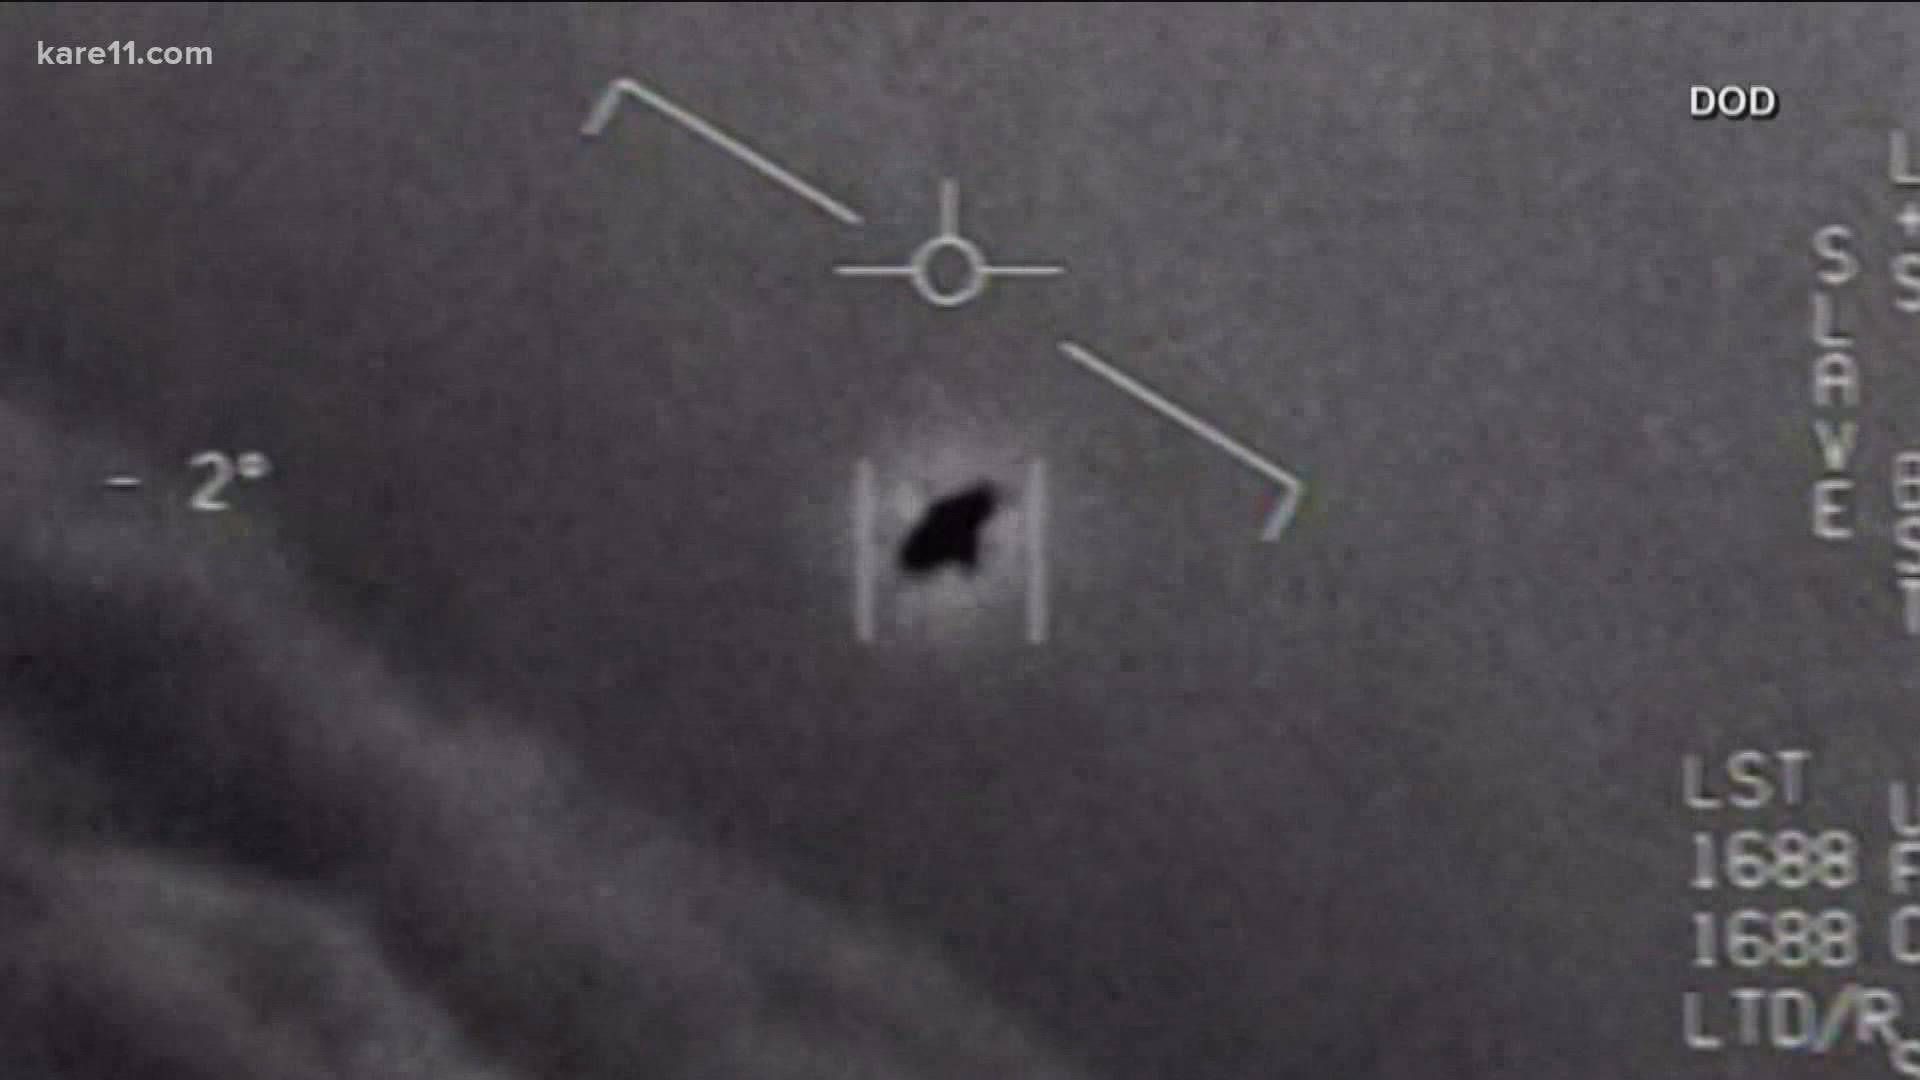 The Mutual UFO Network (MUFON) says most sightings have an explanation. But there are some that do not.